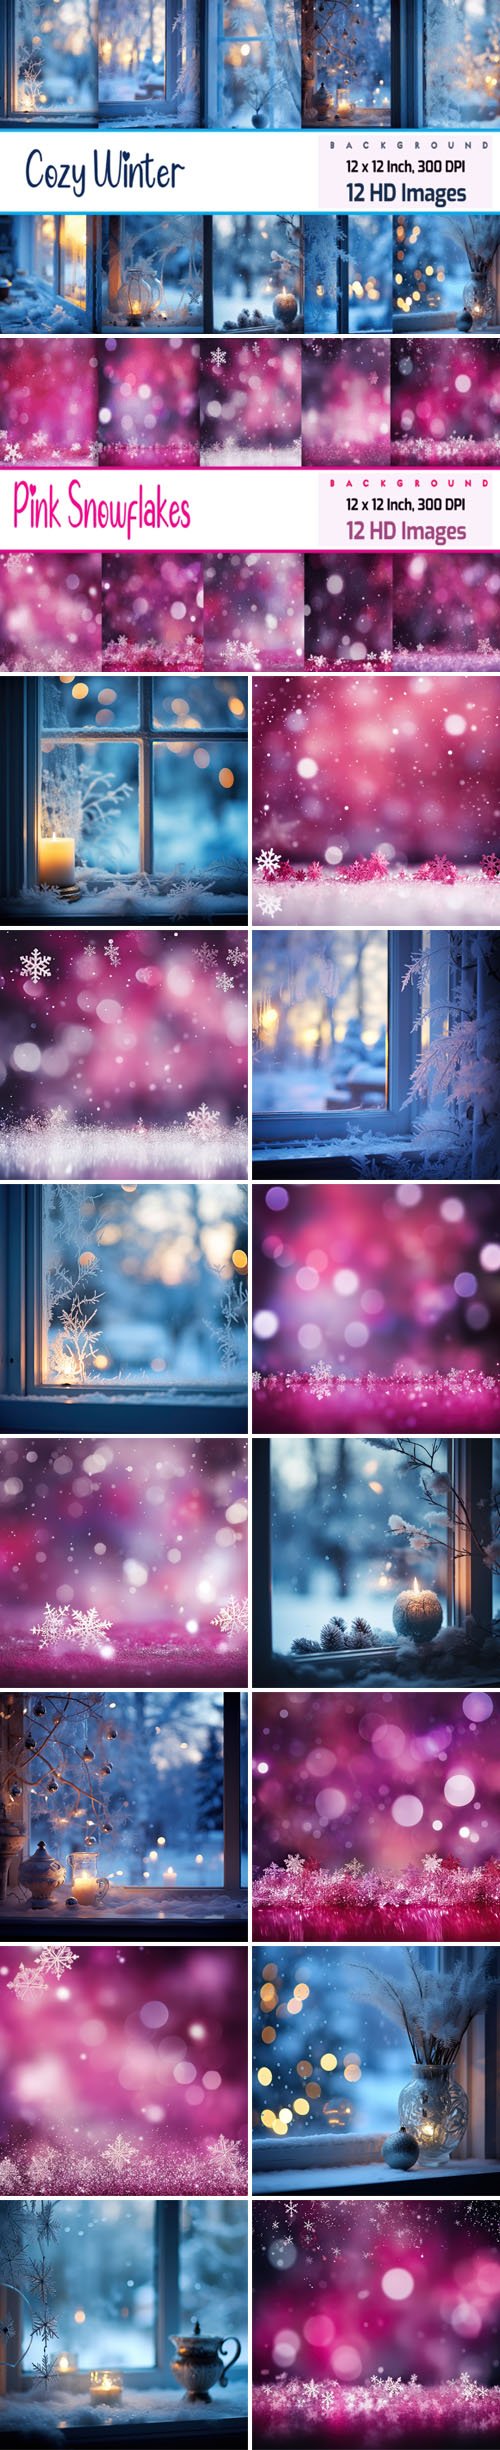 Cozy Winter & Pink Snowflakes - 24 HD Images Collection